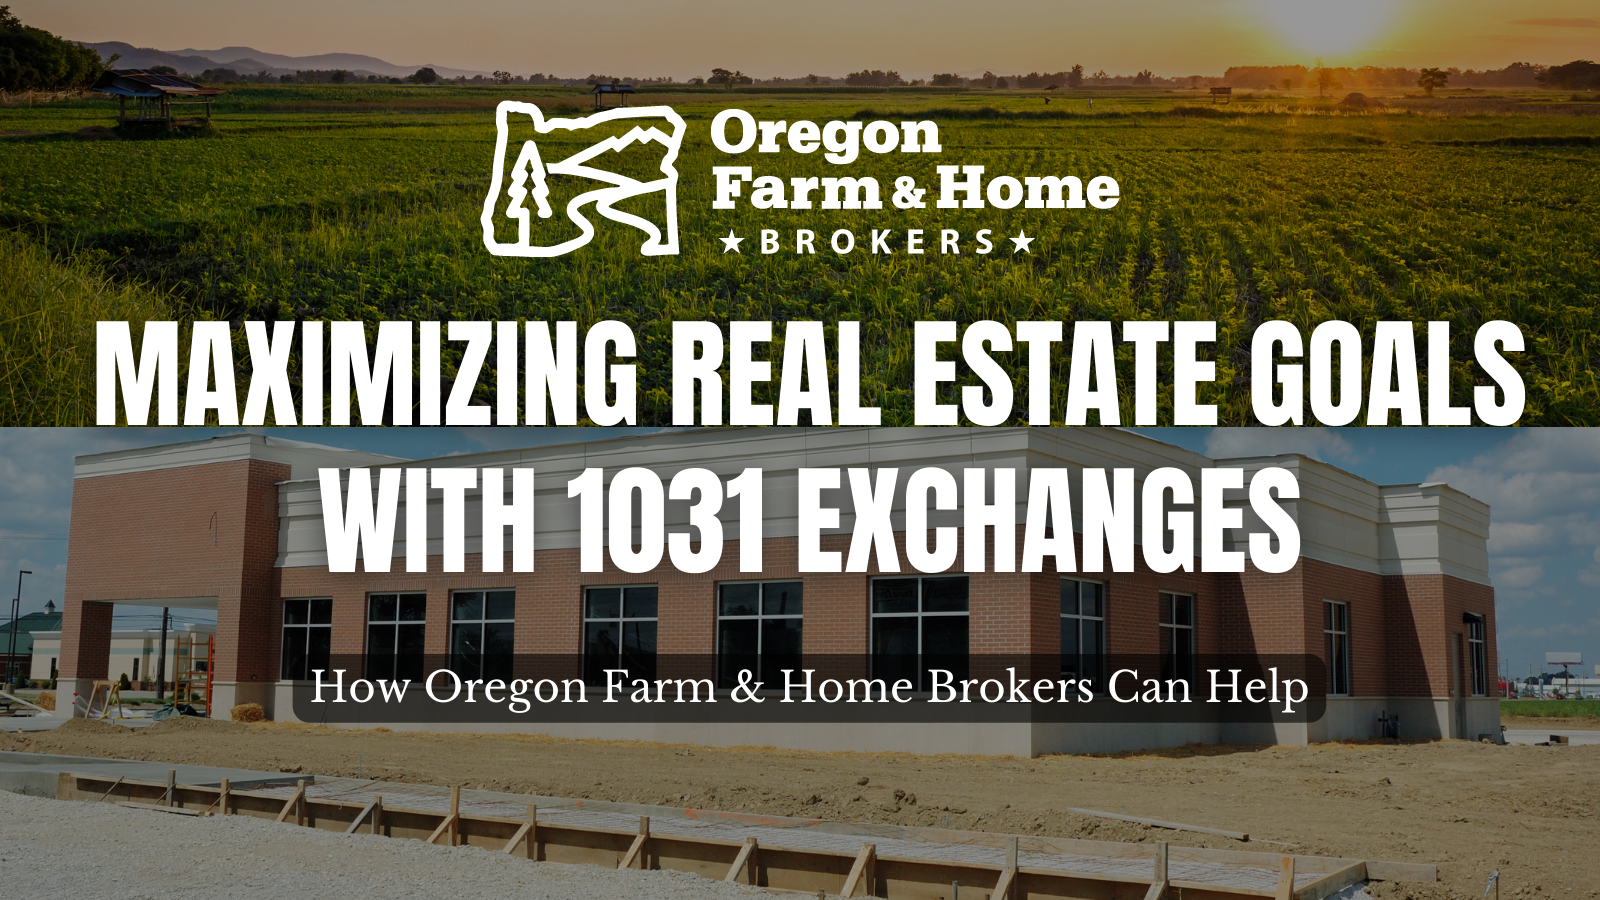 Maximizing Real Estate Goals With 1031 Exchanges